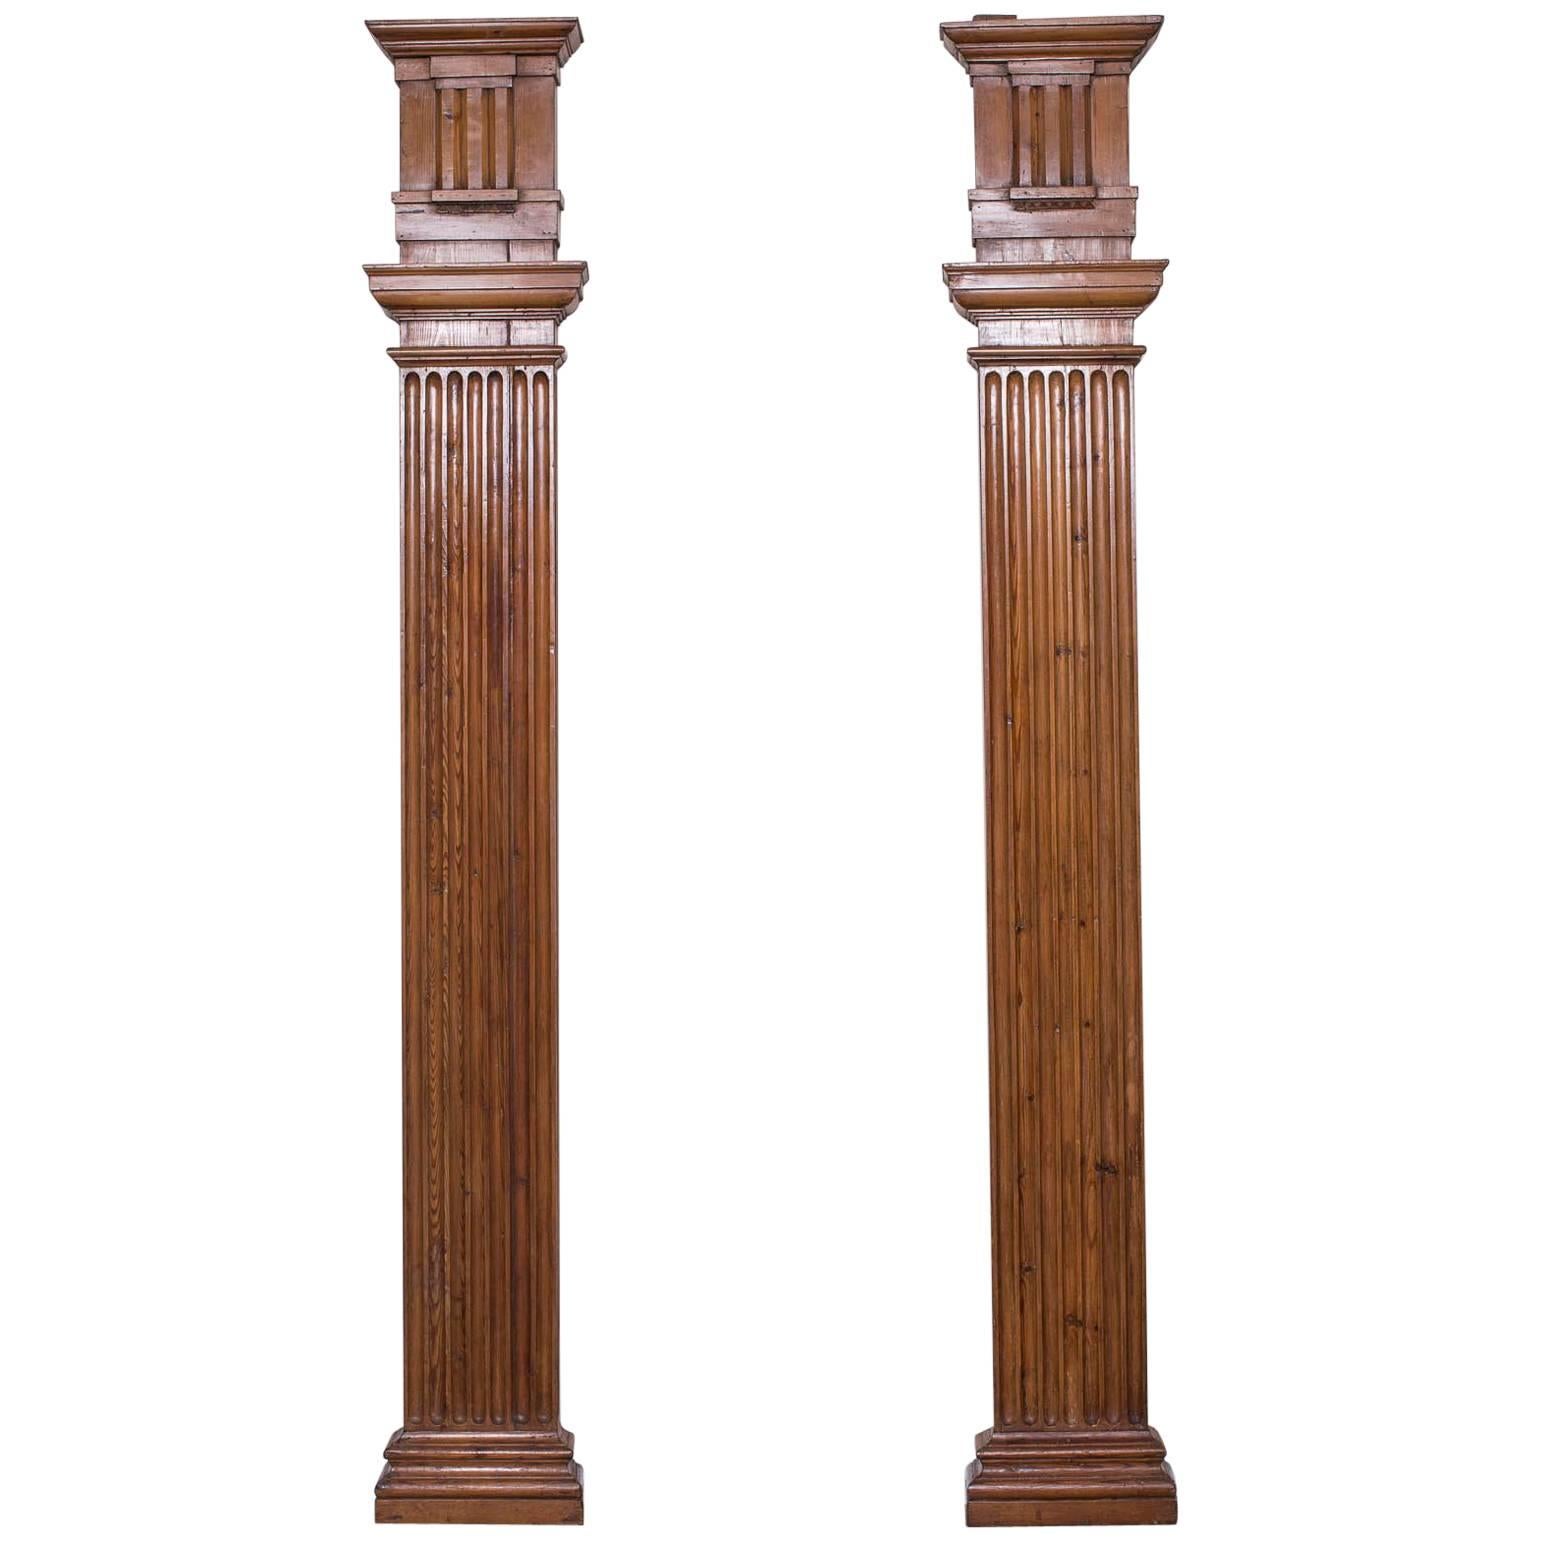 Pair of Antique French Louis XVI Architectural Pilasters, France, circa 1790